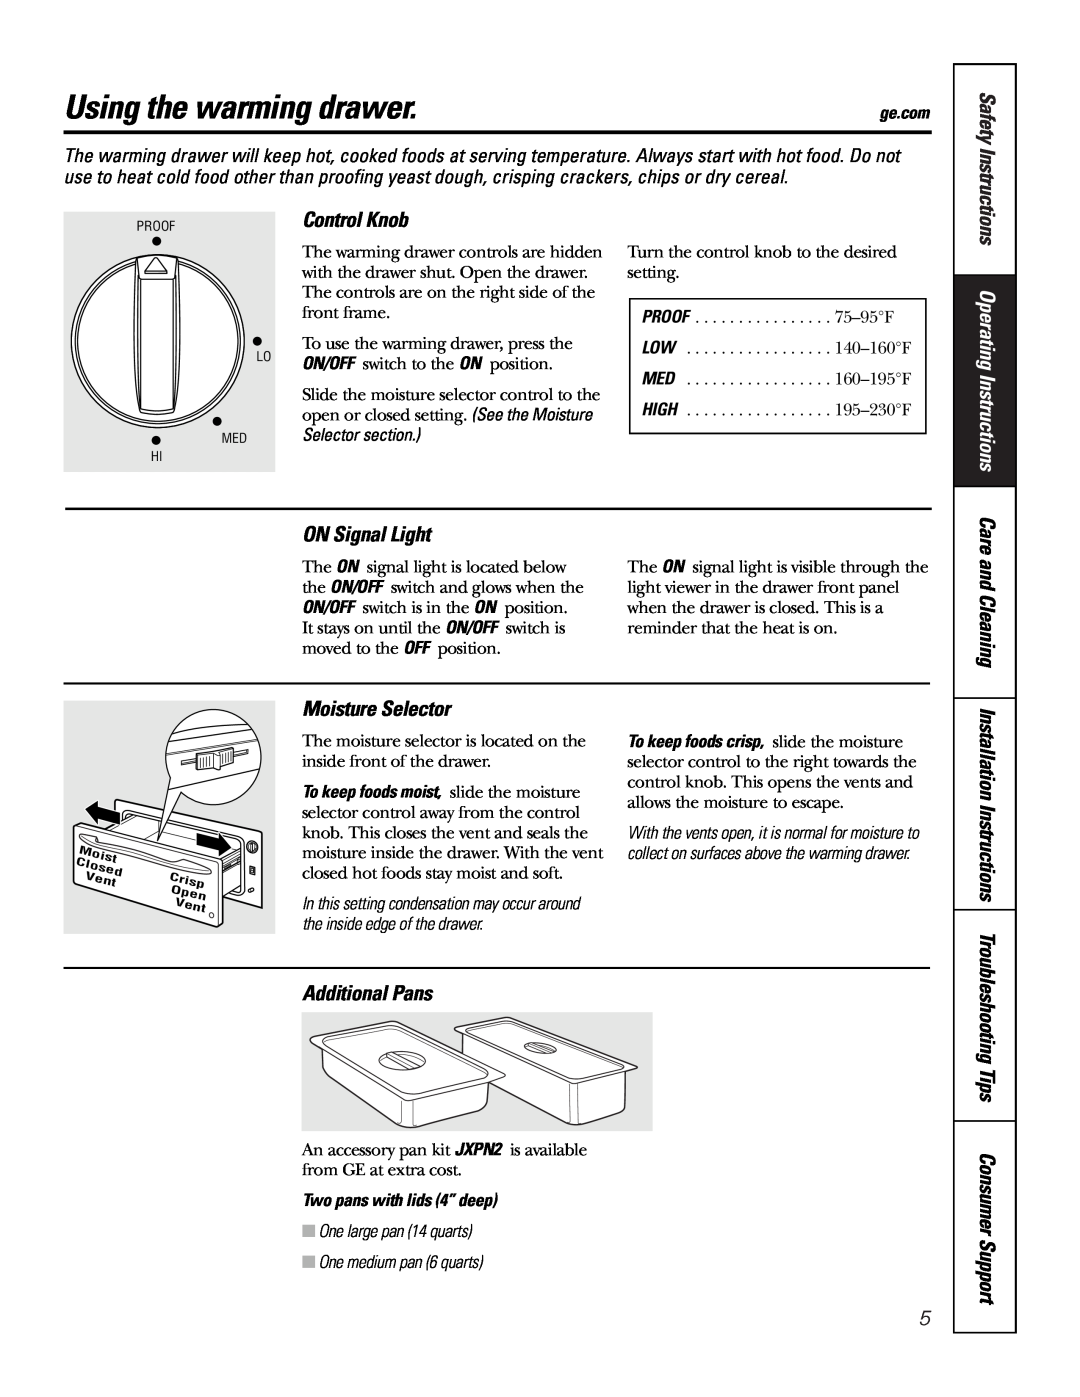 GE JKD915 Using the warming drawer, Operating Instructions, ON Signal Light, Moisture Selector, Installation Instructions 